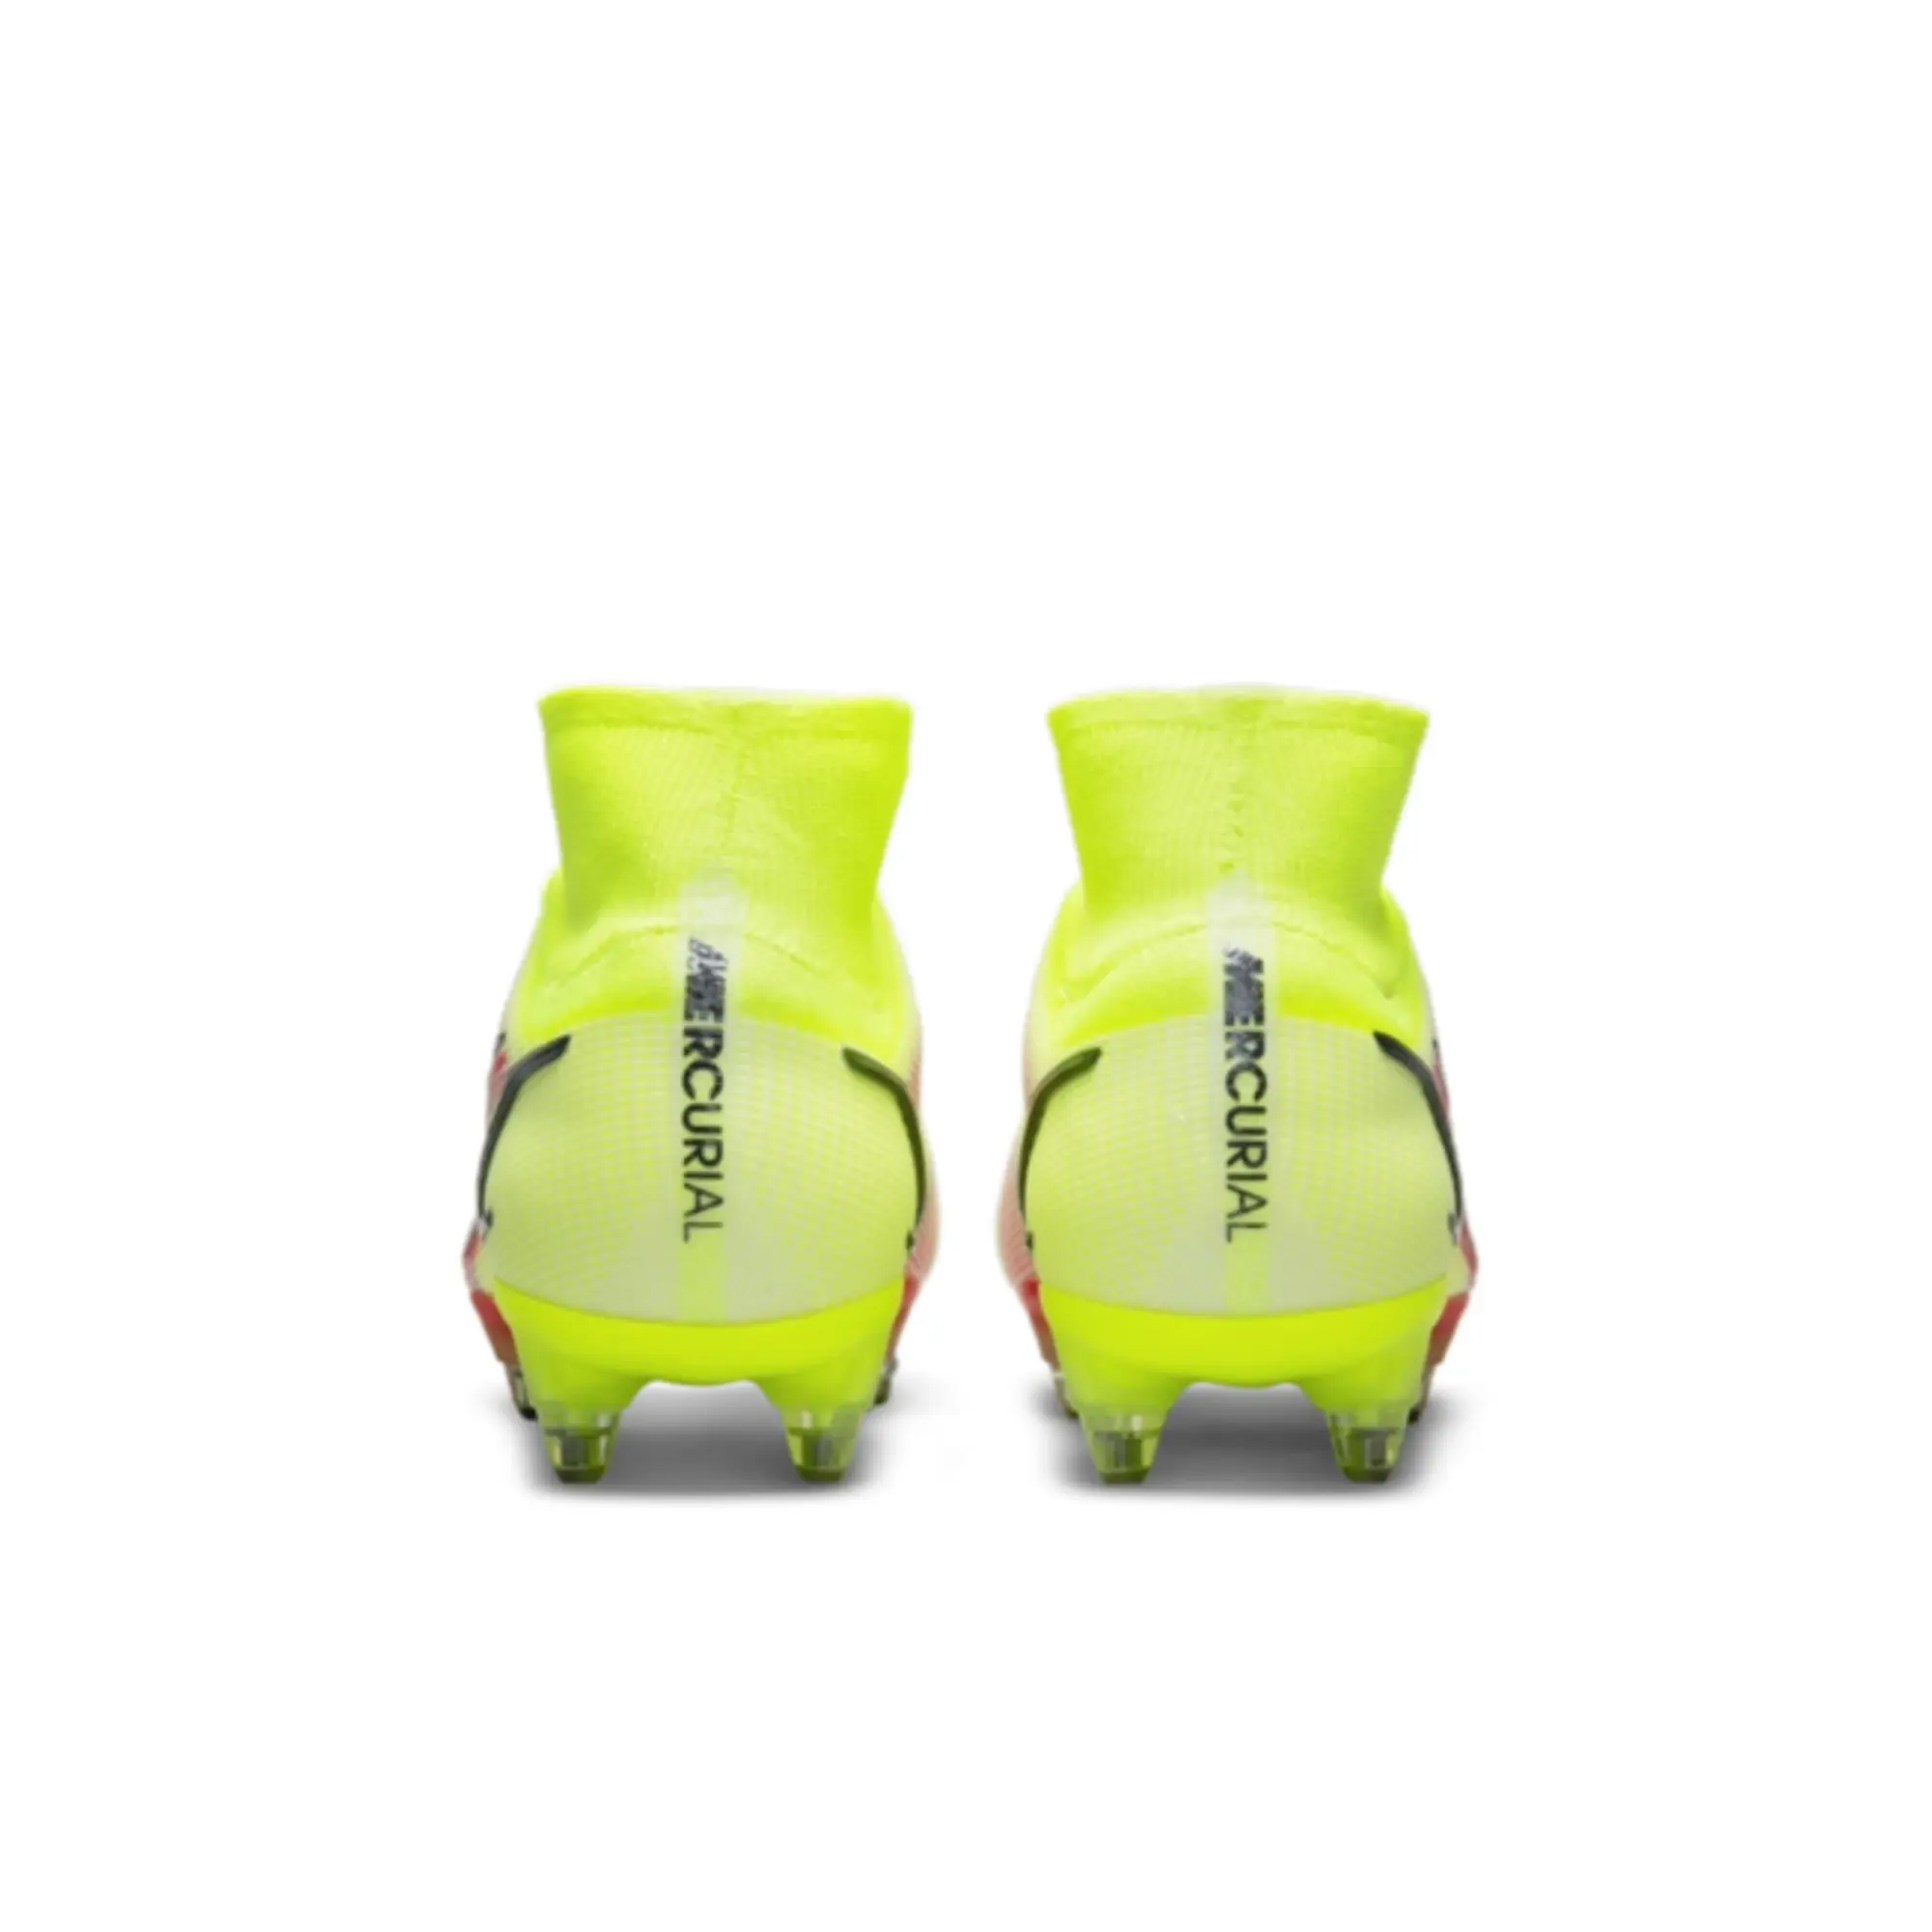 Nike Mercurial Superfly 8 Elite SG-Pro AC Soft-Ground Football Boot - Yellow